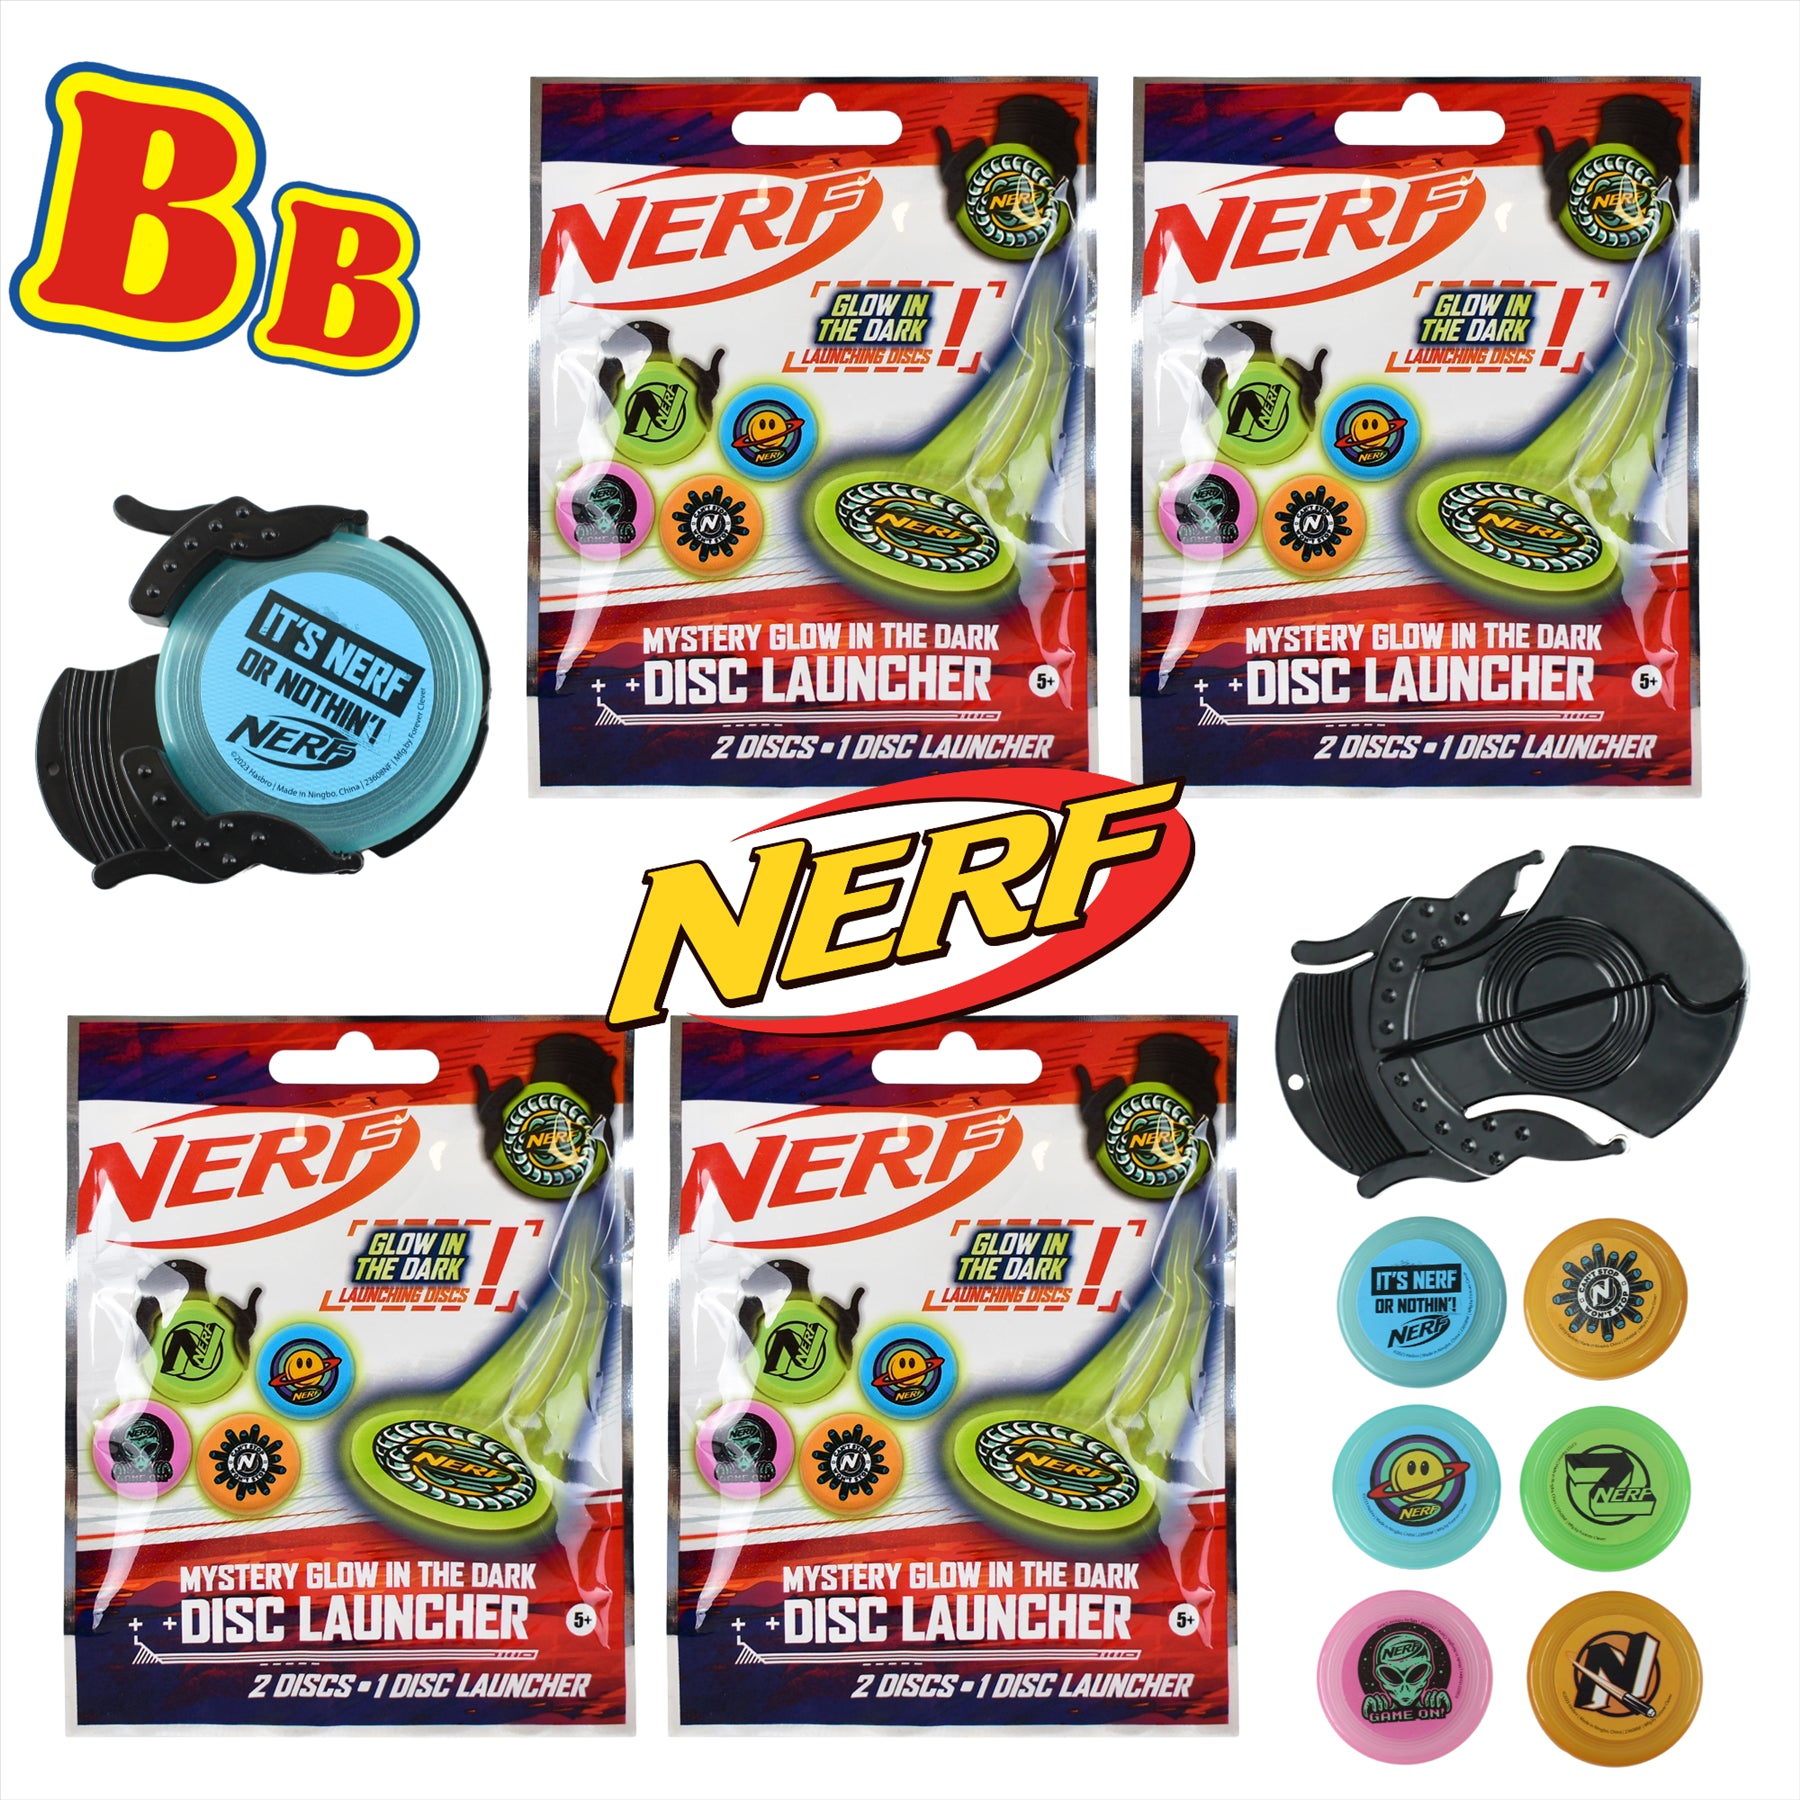 Nerf - Blind Bag Party Favour Sets - (Glow In The Dark Launchers - Pack of 4, 4, Pieces) - Toptoys2u